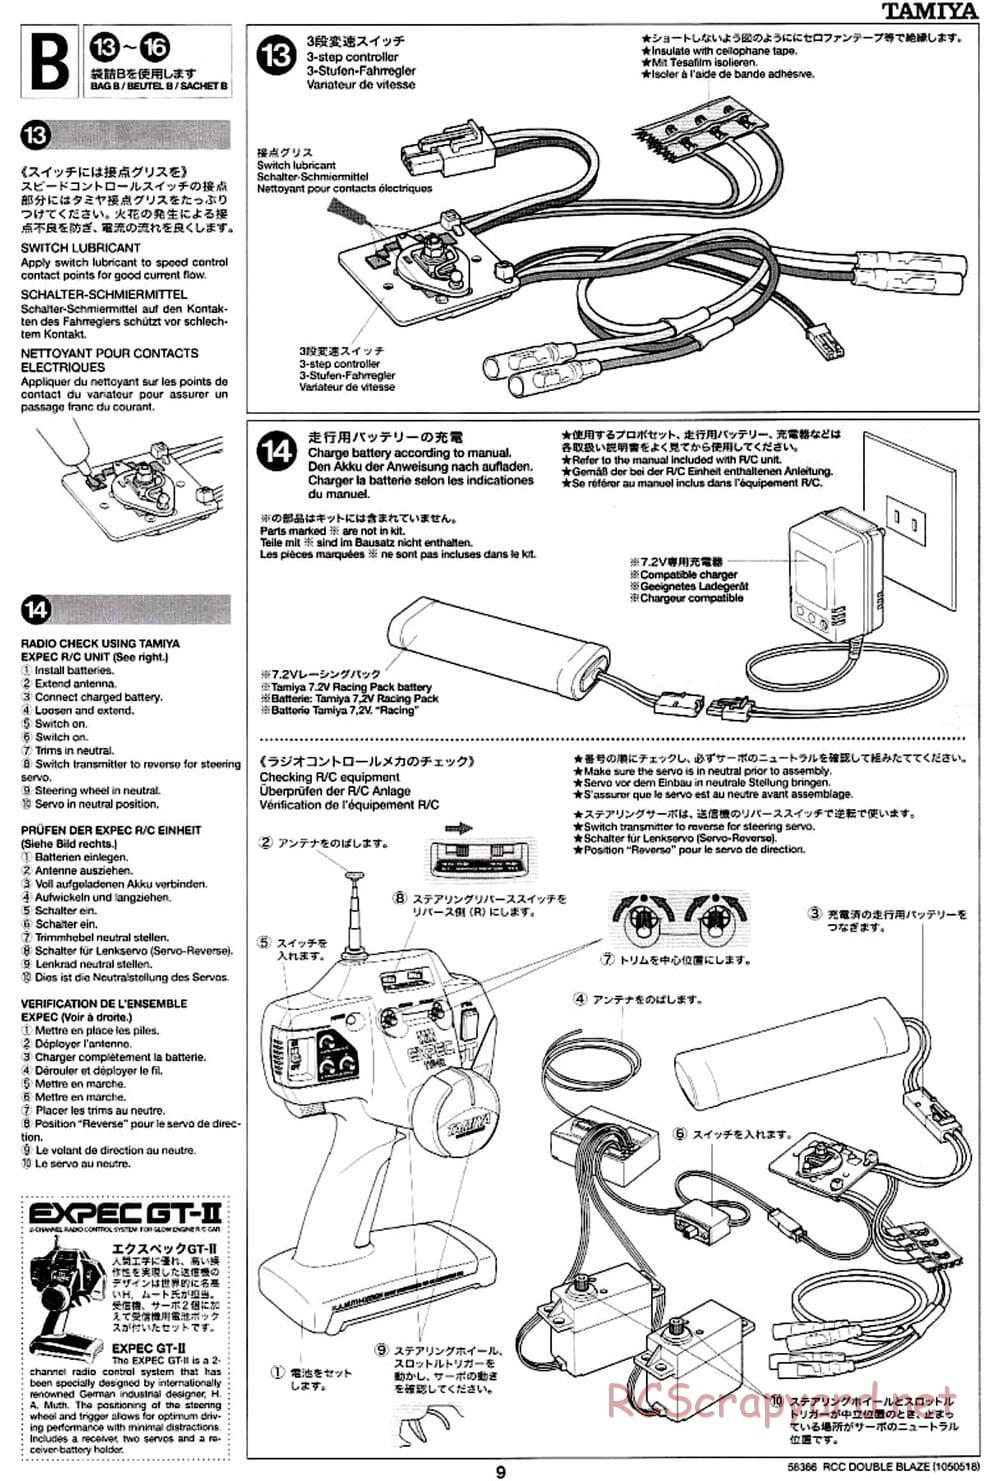 Tamiya - Double Blaze - WR-01 Chassis - Manual - Page 9